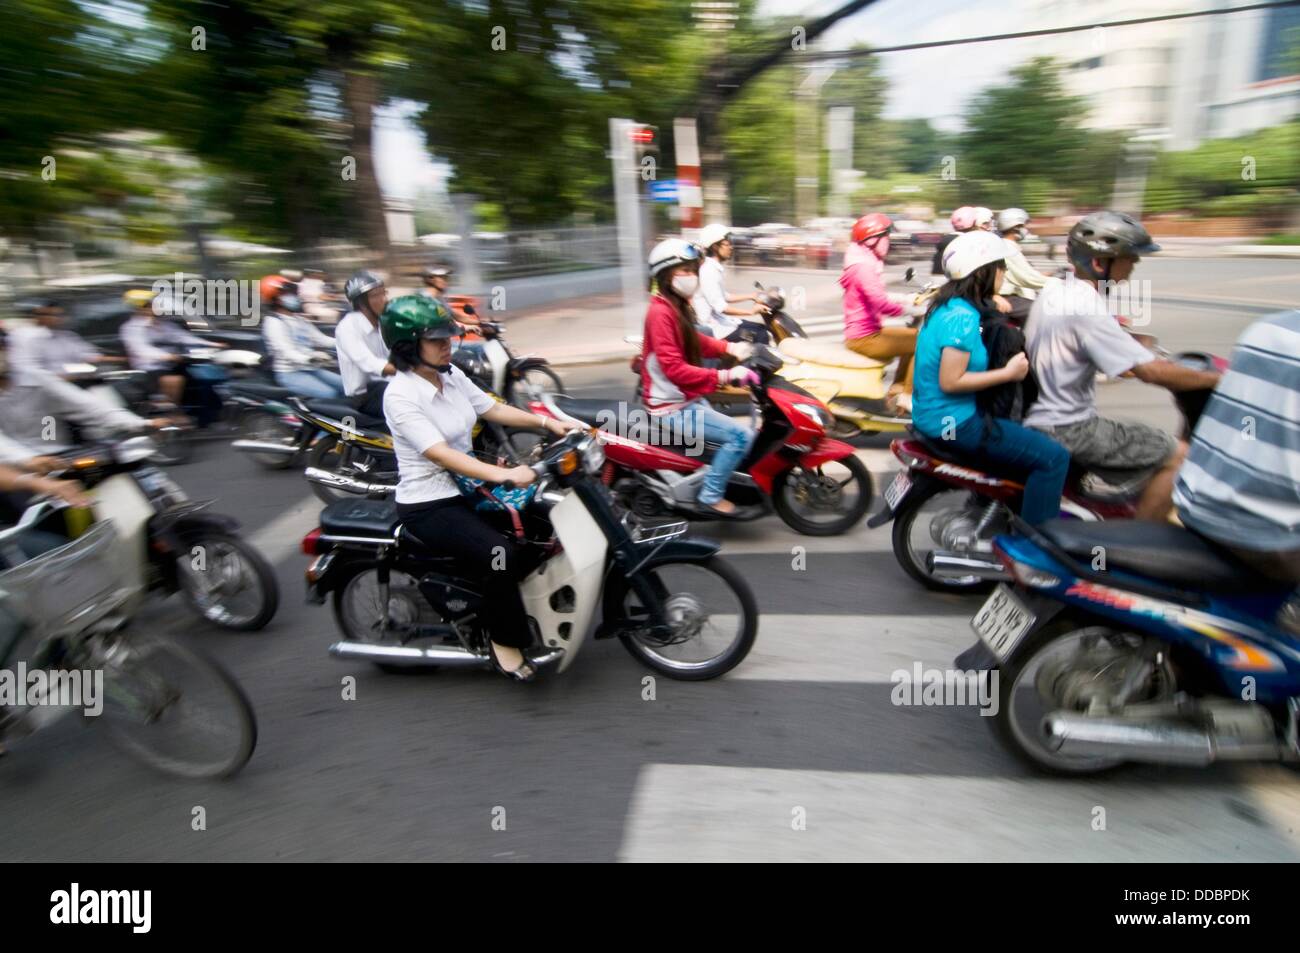 Heavy traffic consisting of many scooters during rush hour in Saigon. Stock Photo